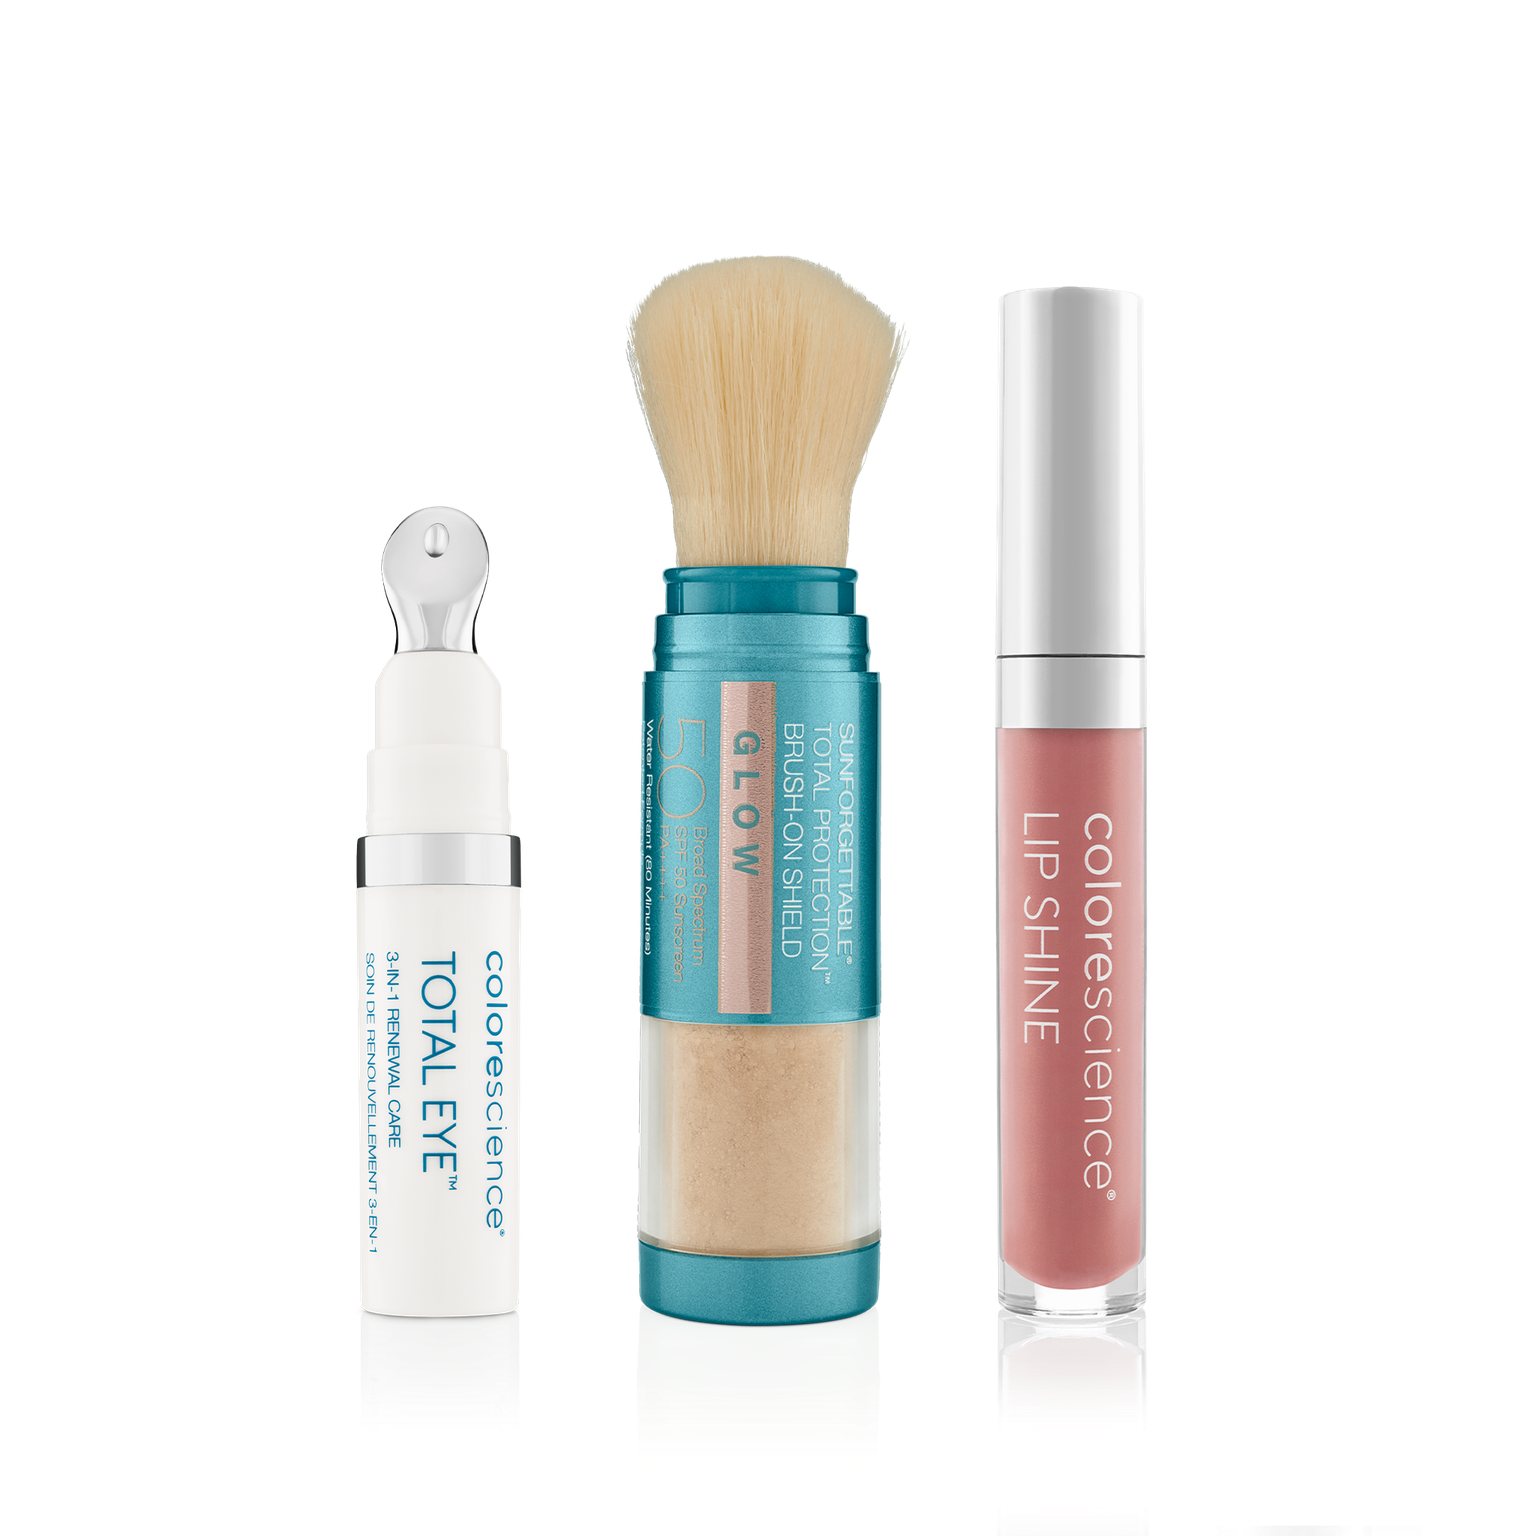 Must Haves for Mom: Total Eye 3-in-1 Renewal Therapy SPF 35, Sunforgettable Total Protection Brush-On Shield Glow SPF 50, Lip Shine SPF 35 Blush Glow || hide